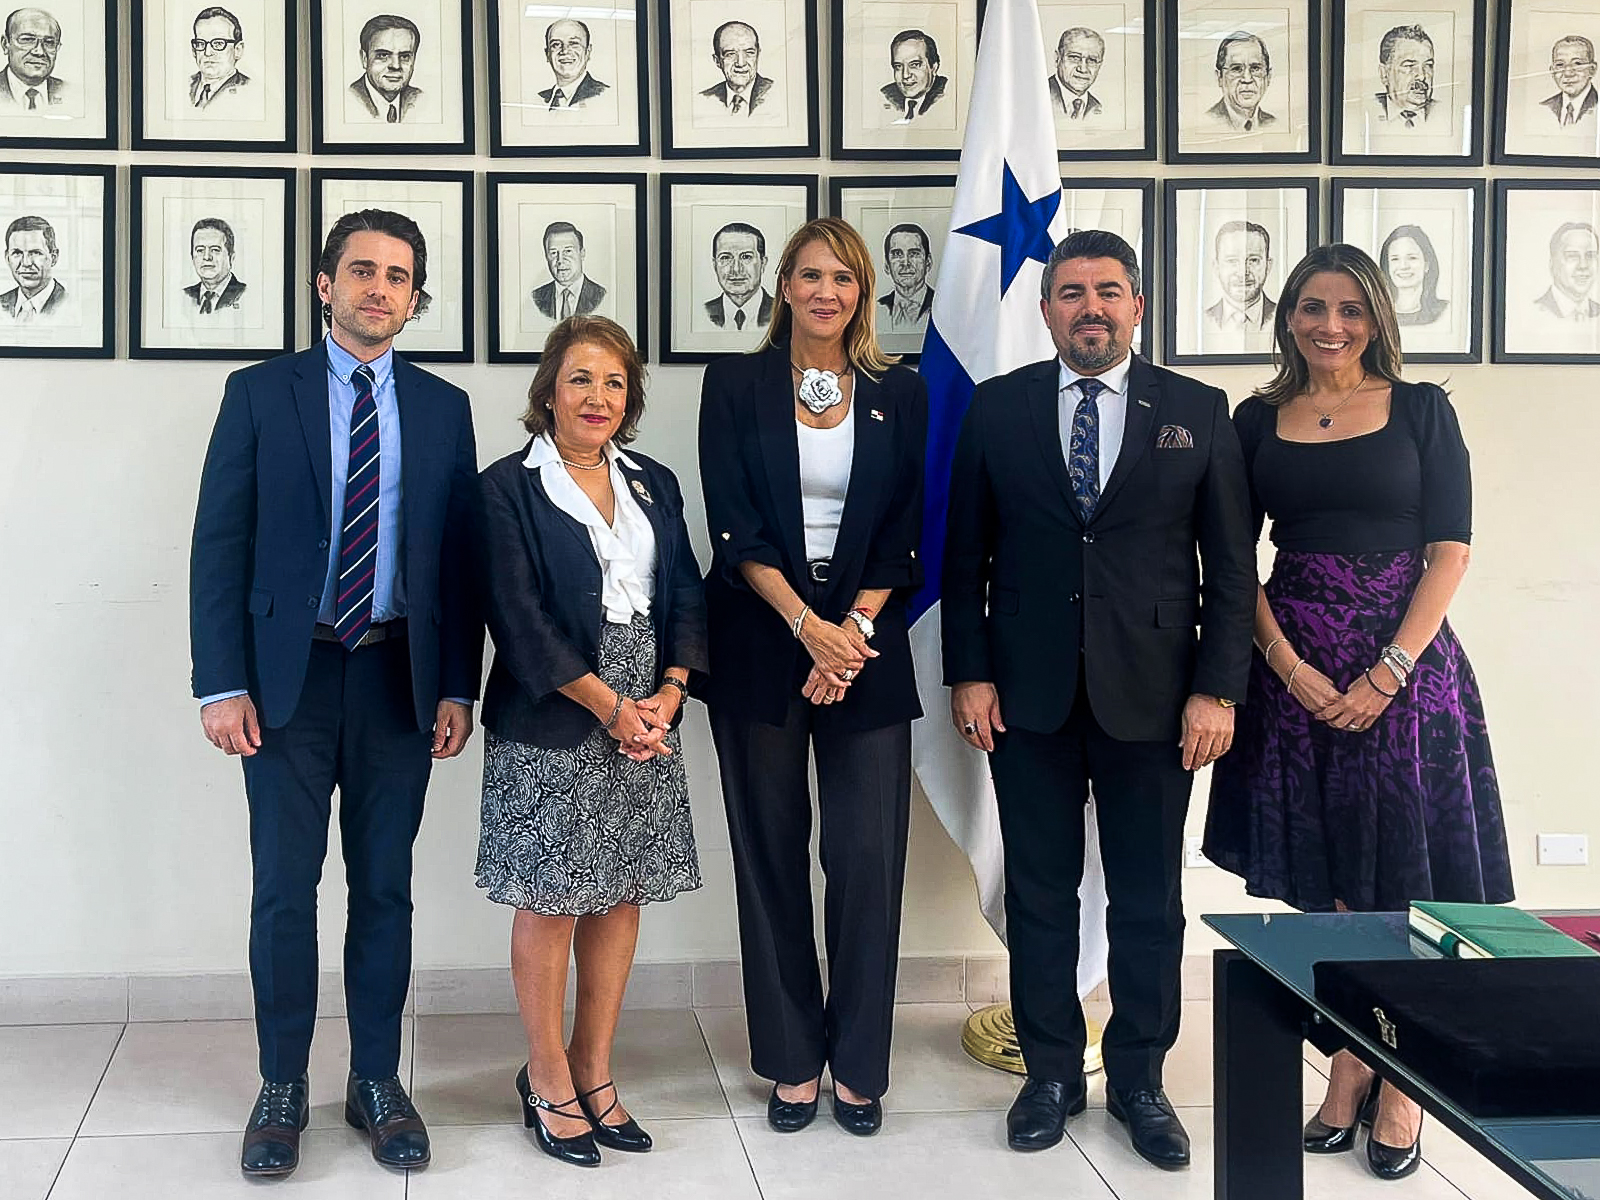 TİKA’s Vice President Yorulmaz Paid a Working Visit to Central America